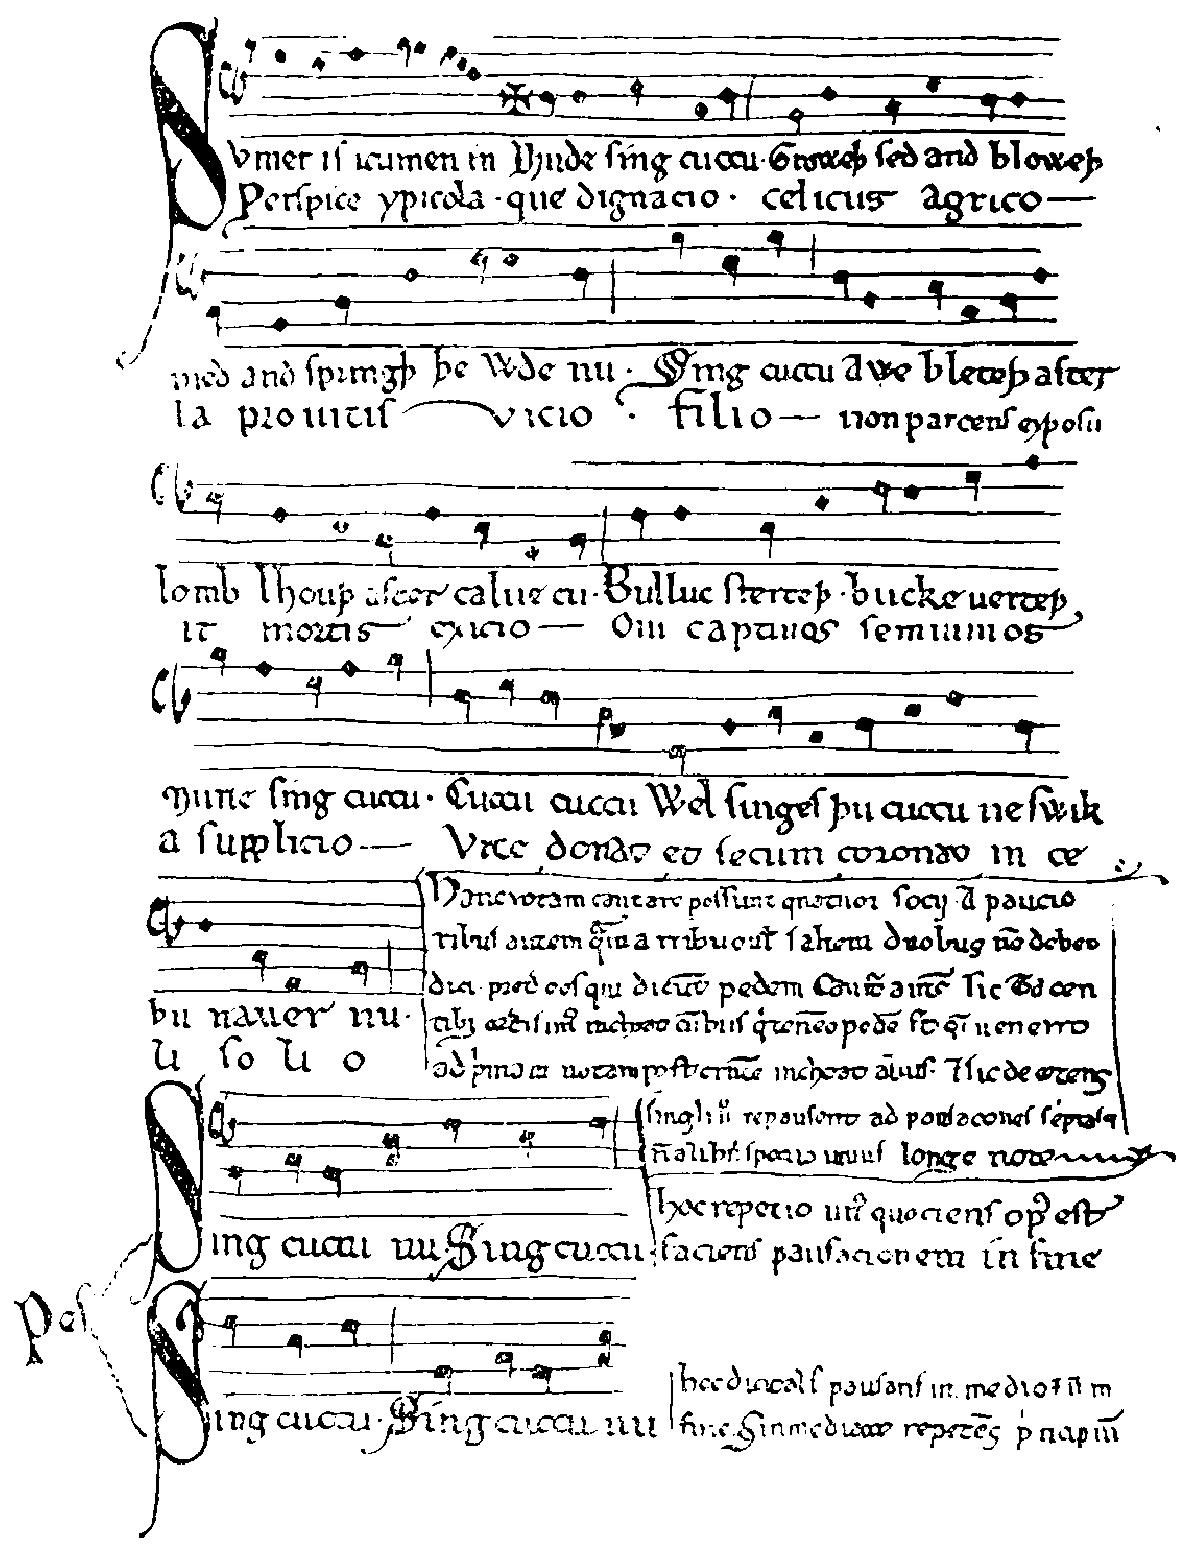 Manuscript of original song in archaic notation.